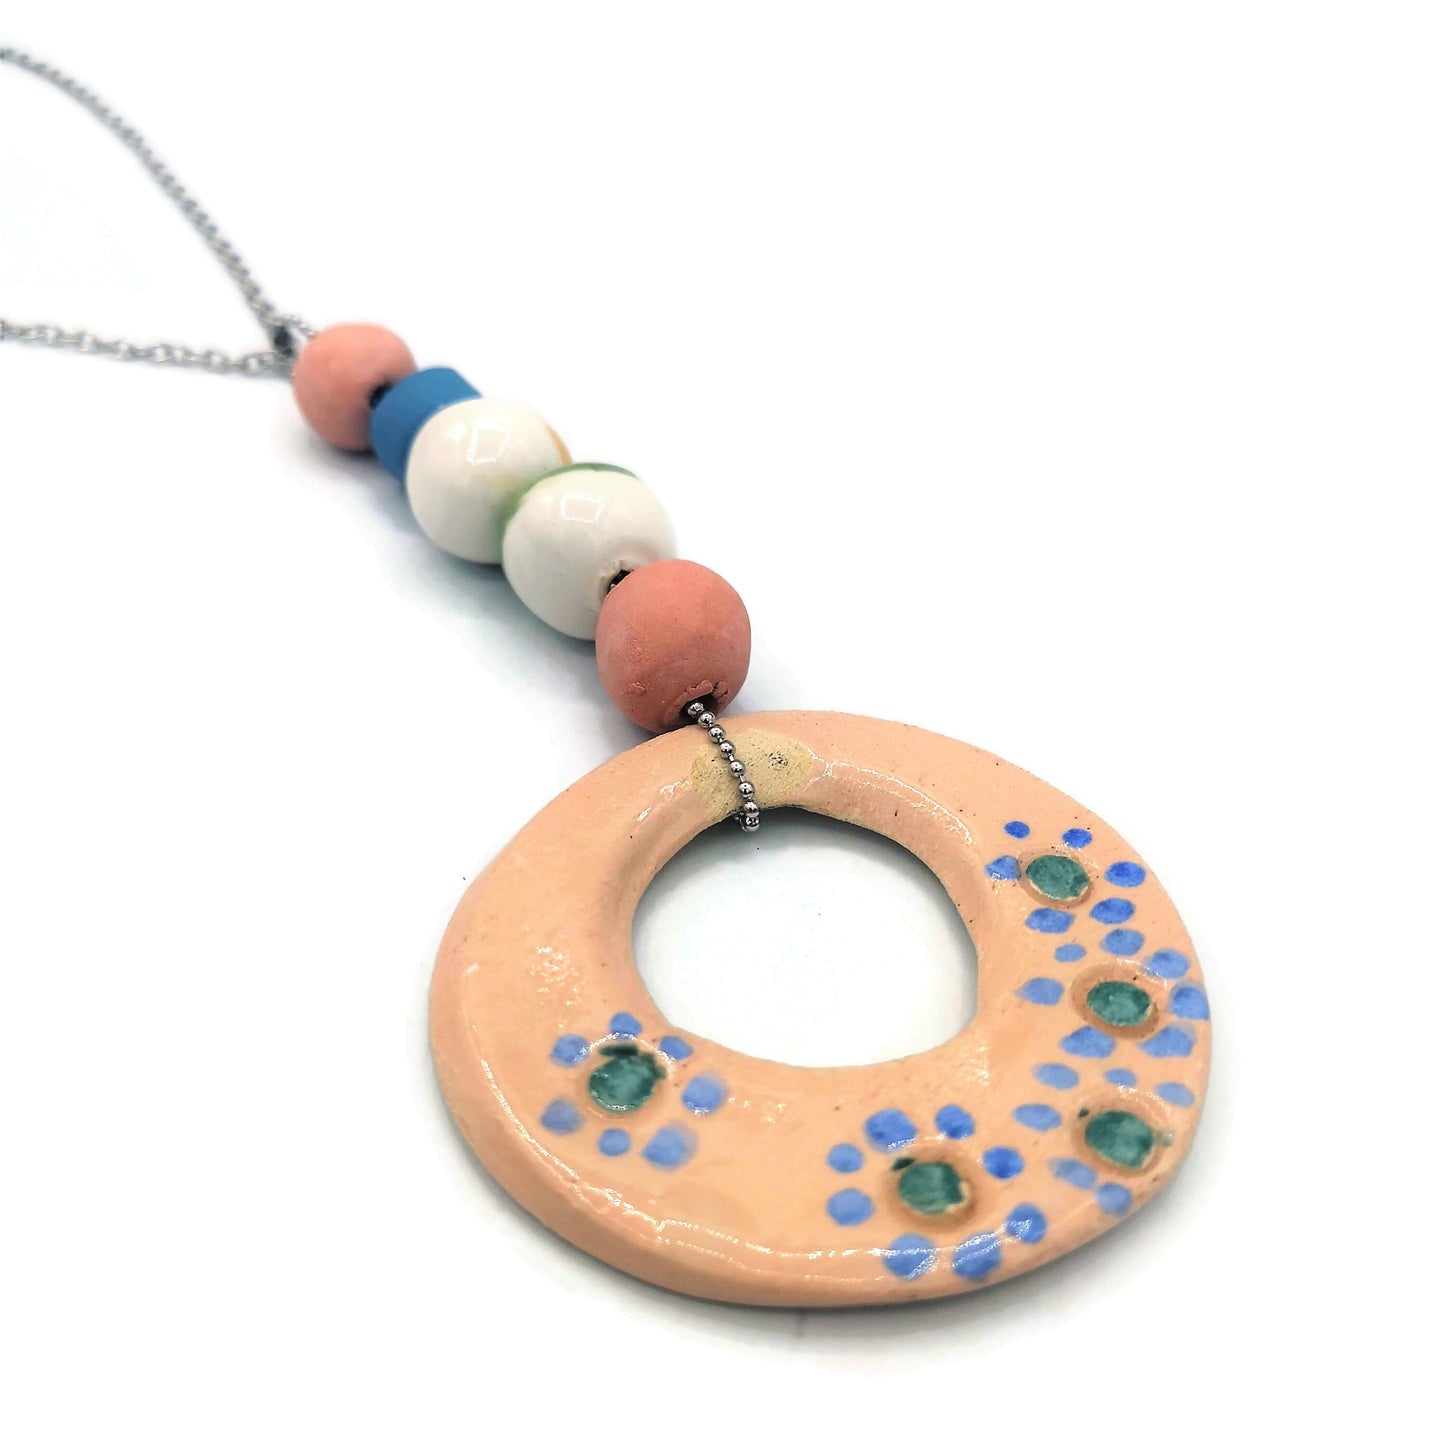 Statement Ceramic Pendant Necklace For Women, Everyday Beaded Necklace Best Gifts For Her, Best Sellers Unique Handmade Jewelry For Her - Ceramica Ana Rafael